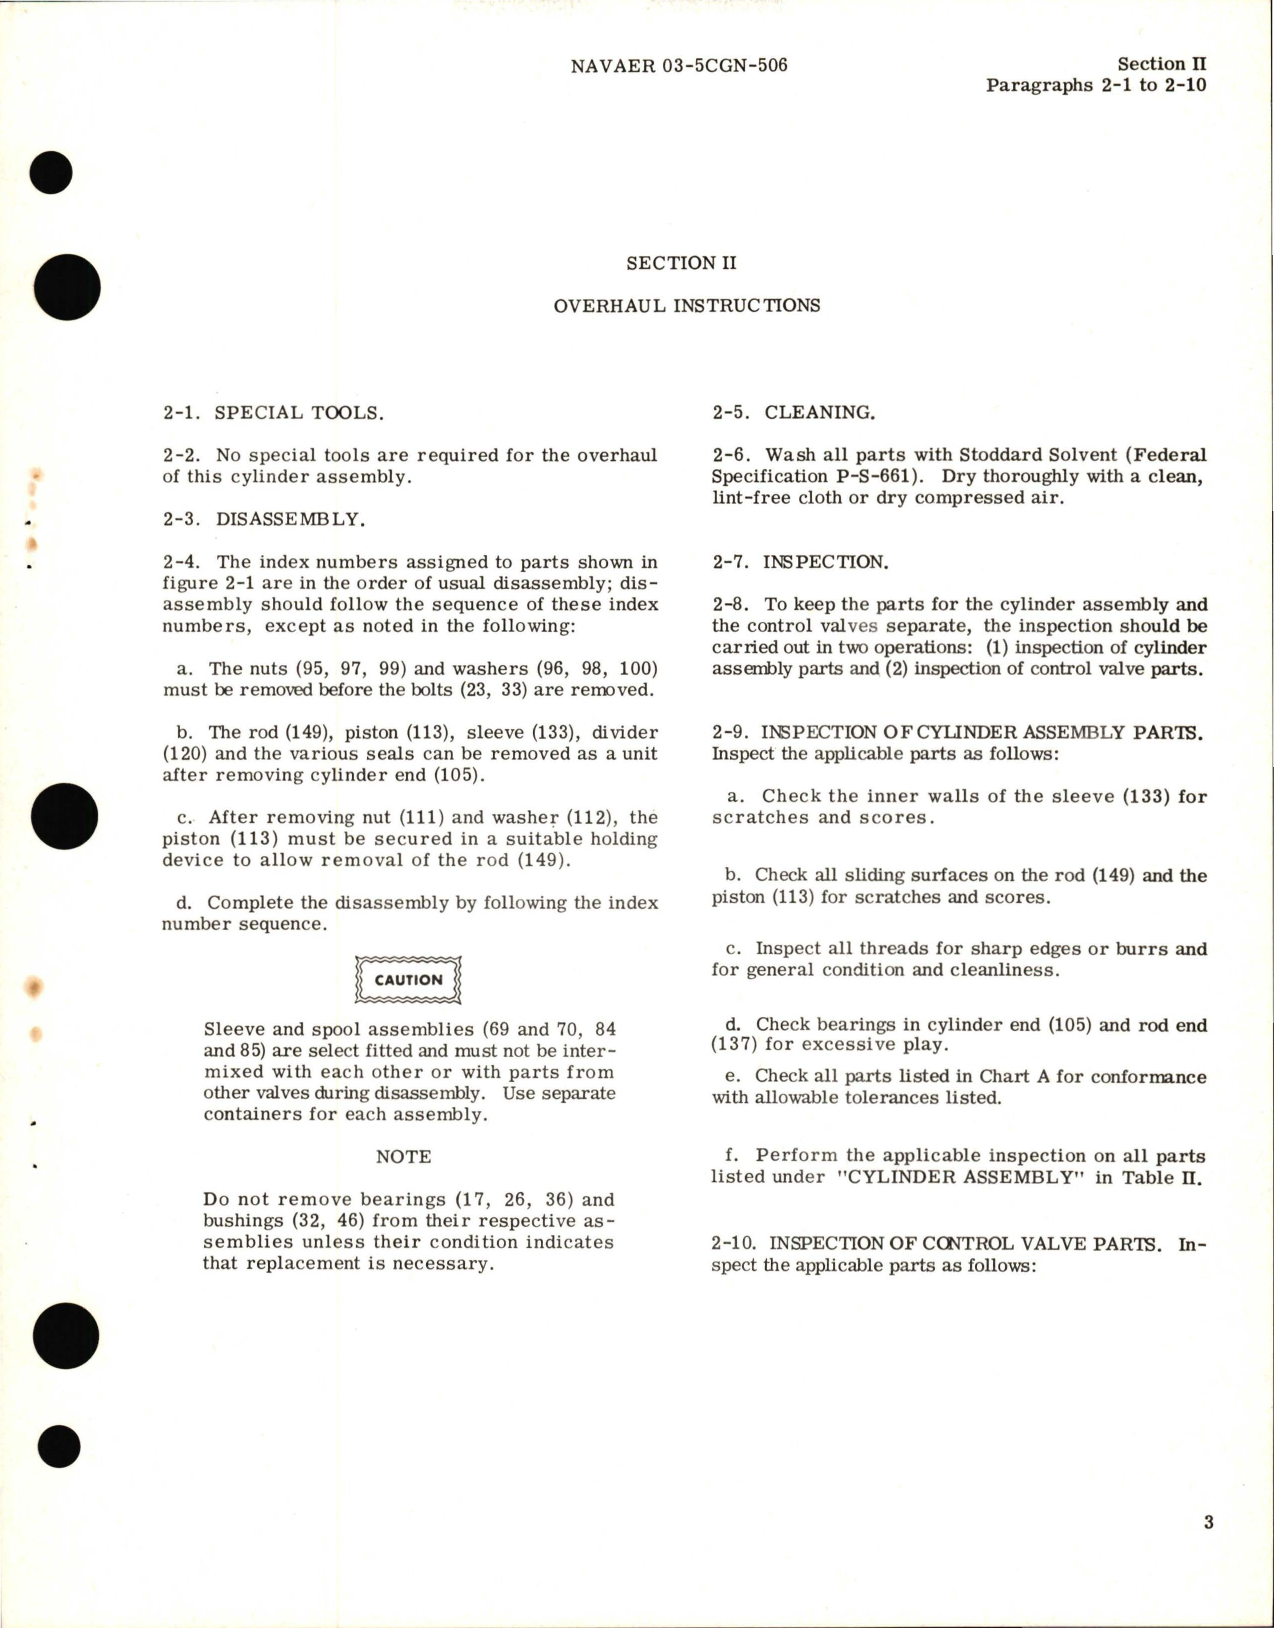 Sample page 5 from AirCorps Library document: Overhaul Instructions for Hydraulic Flight Control Aileron Actuator Assembly - Part 209-58705-21 and 209-58705-22